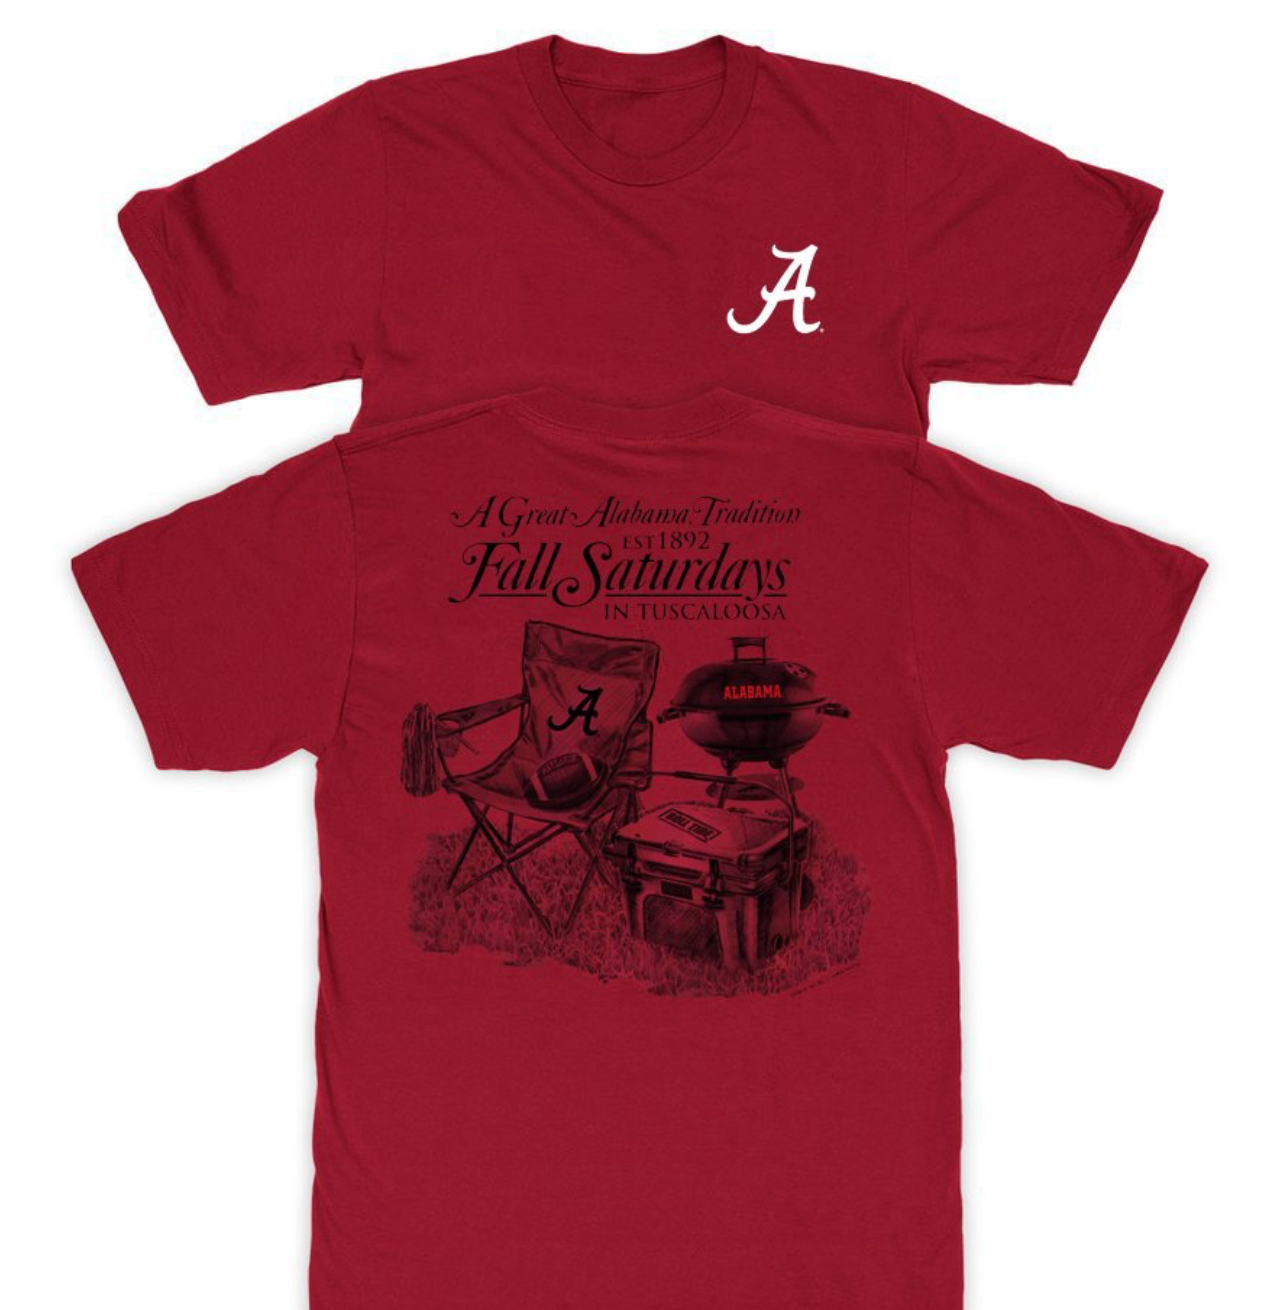 Alabama Our Traditions T-Shirt - 365 Gameday